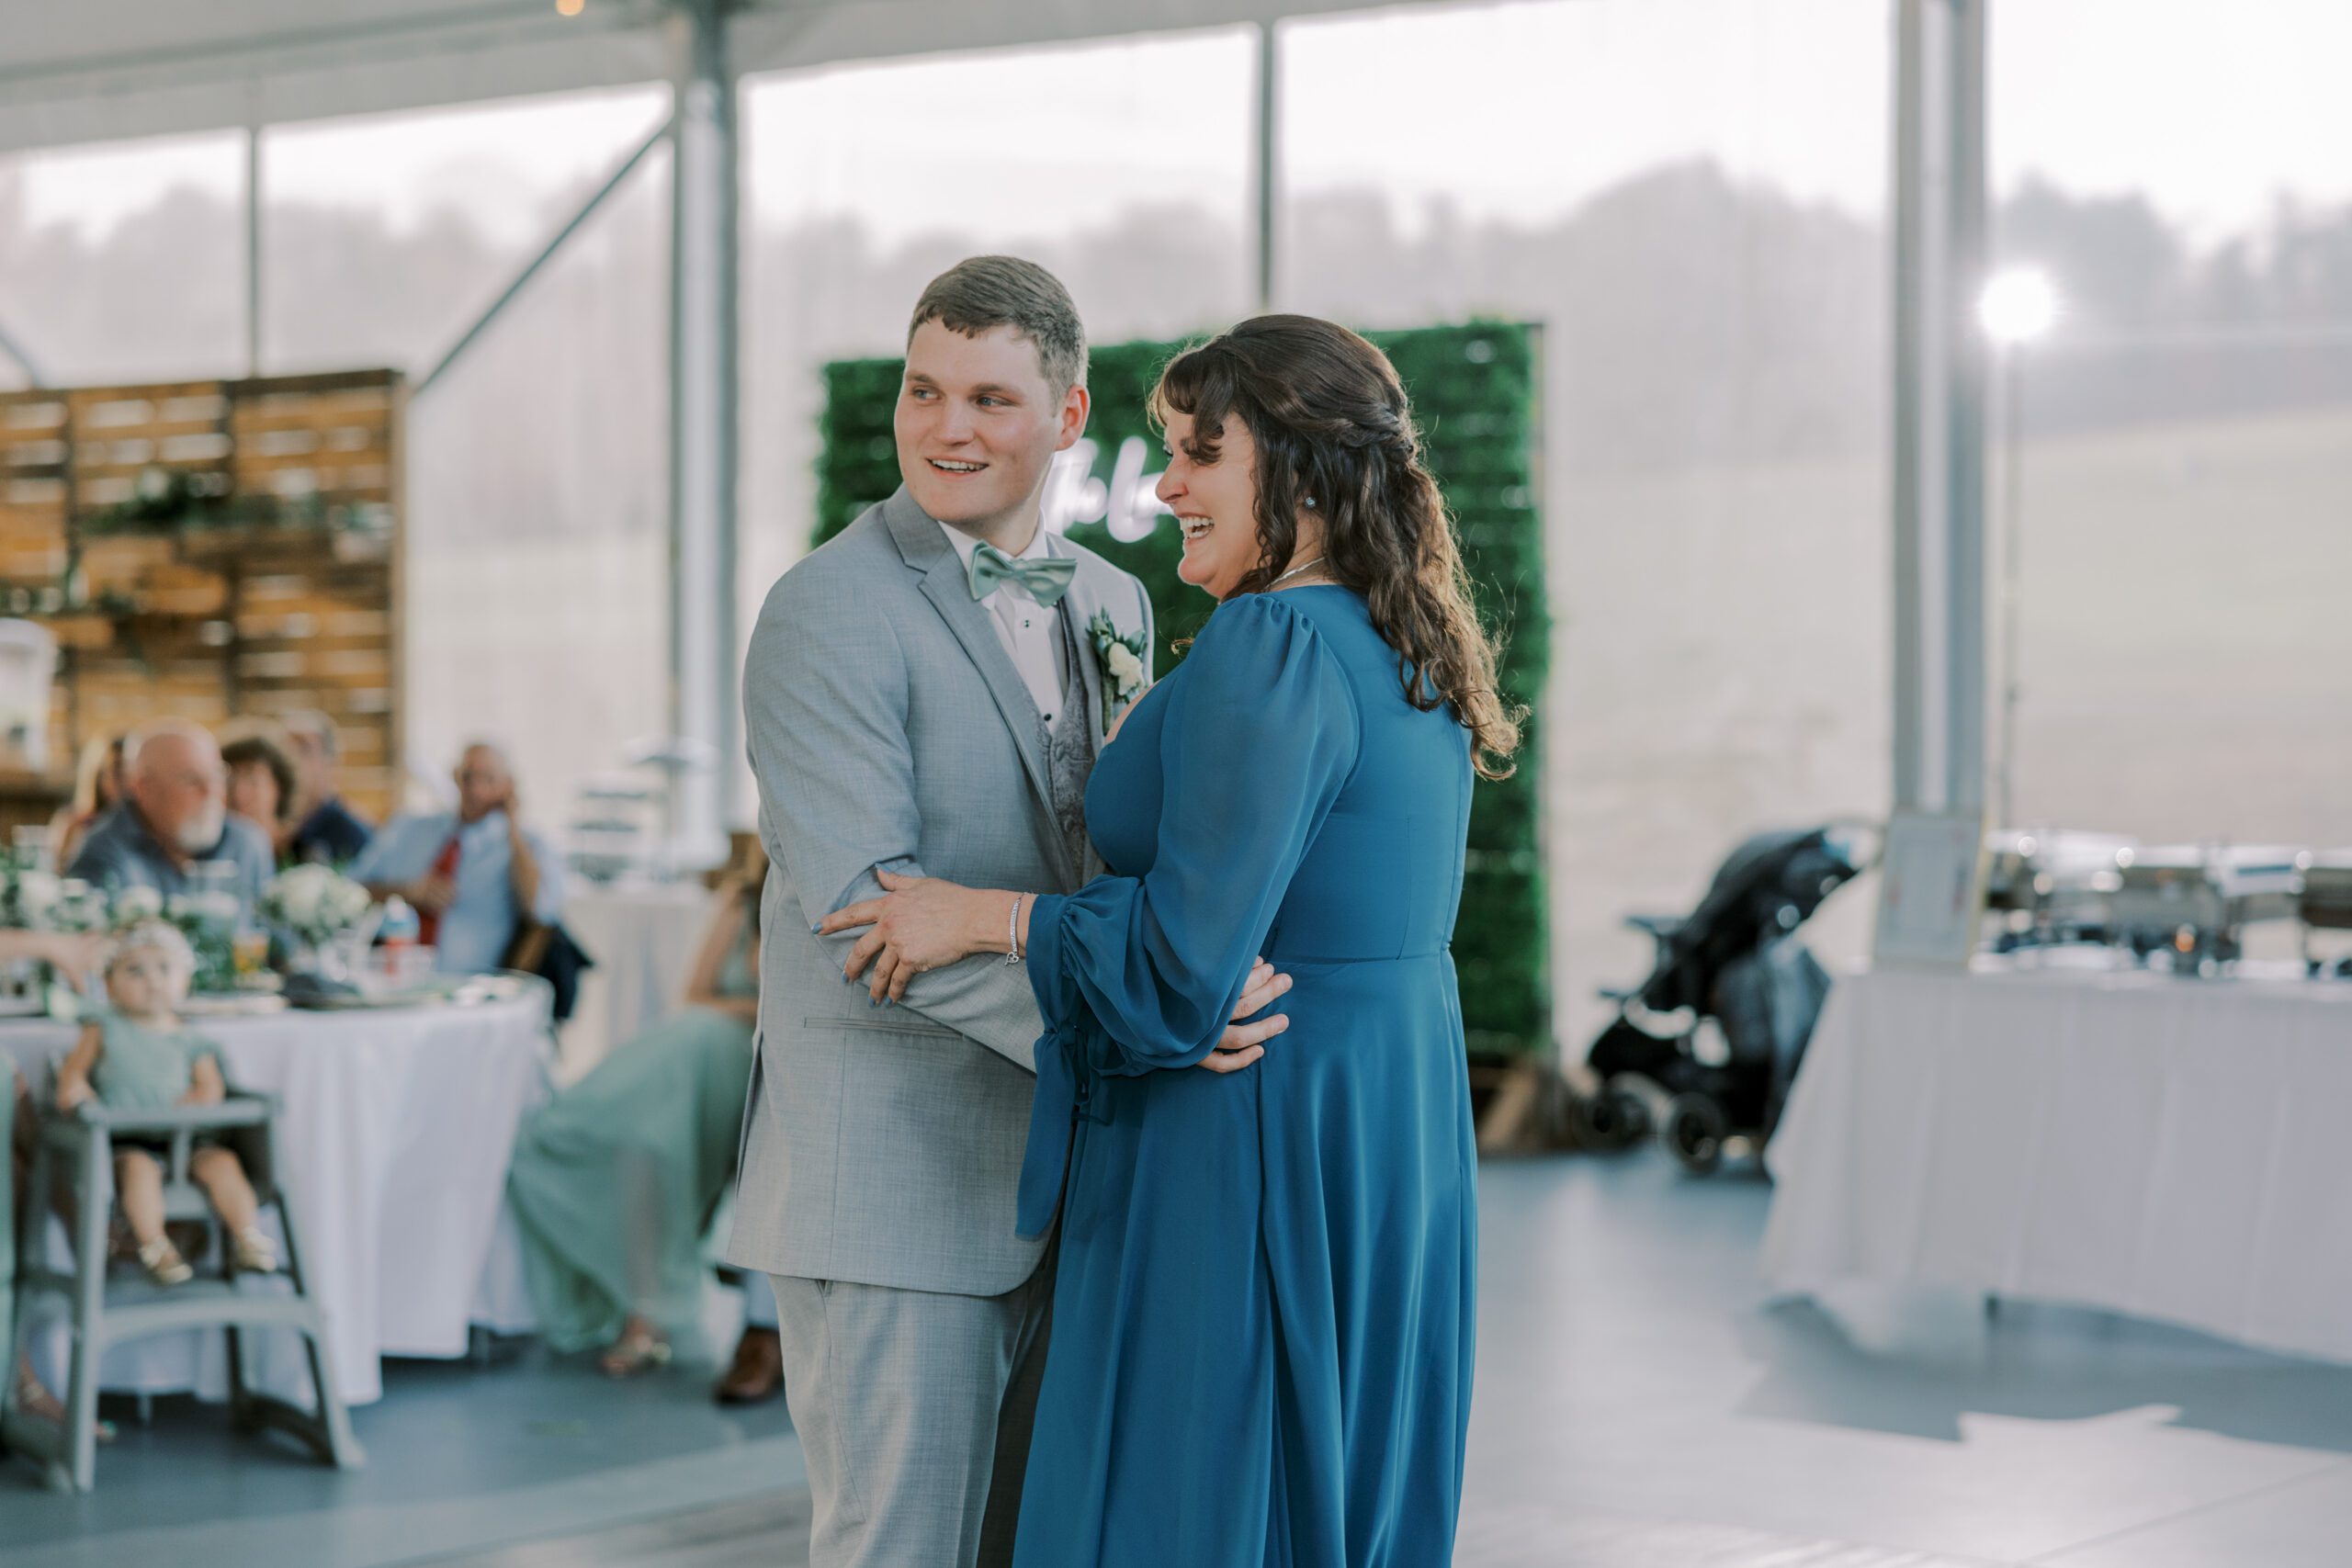 Groom and his mother dancing, both looking off to the side smiling, mother is in long sleeve blue dress